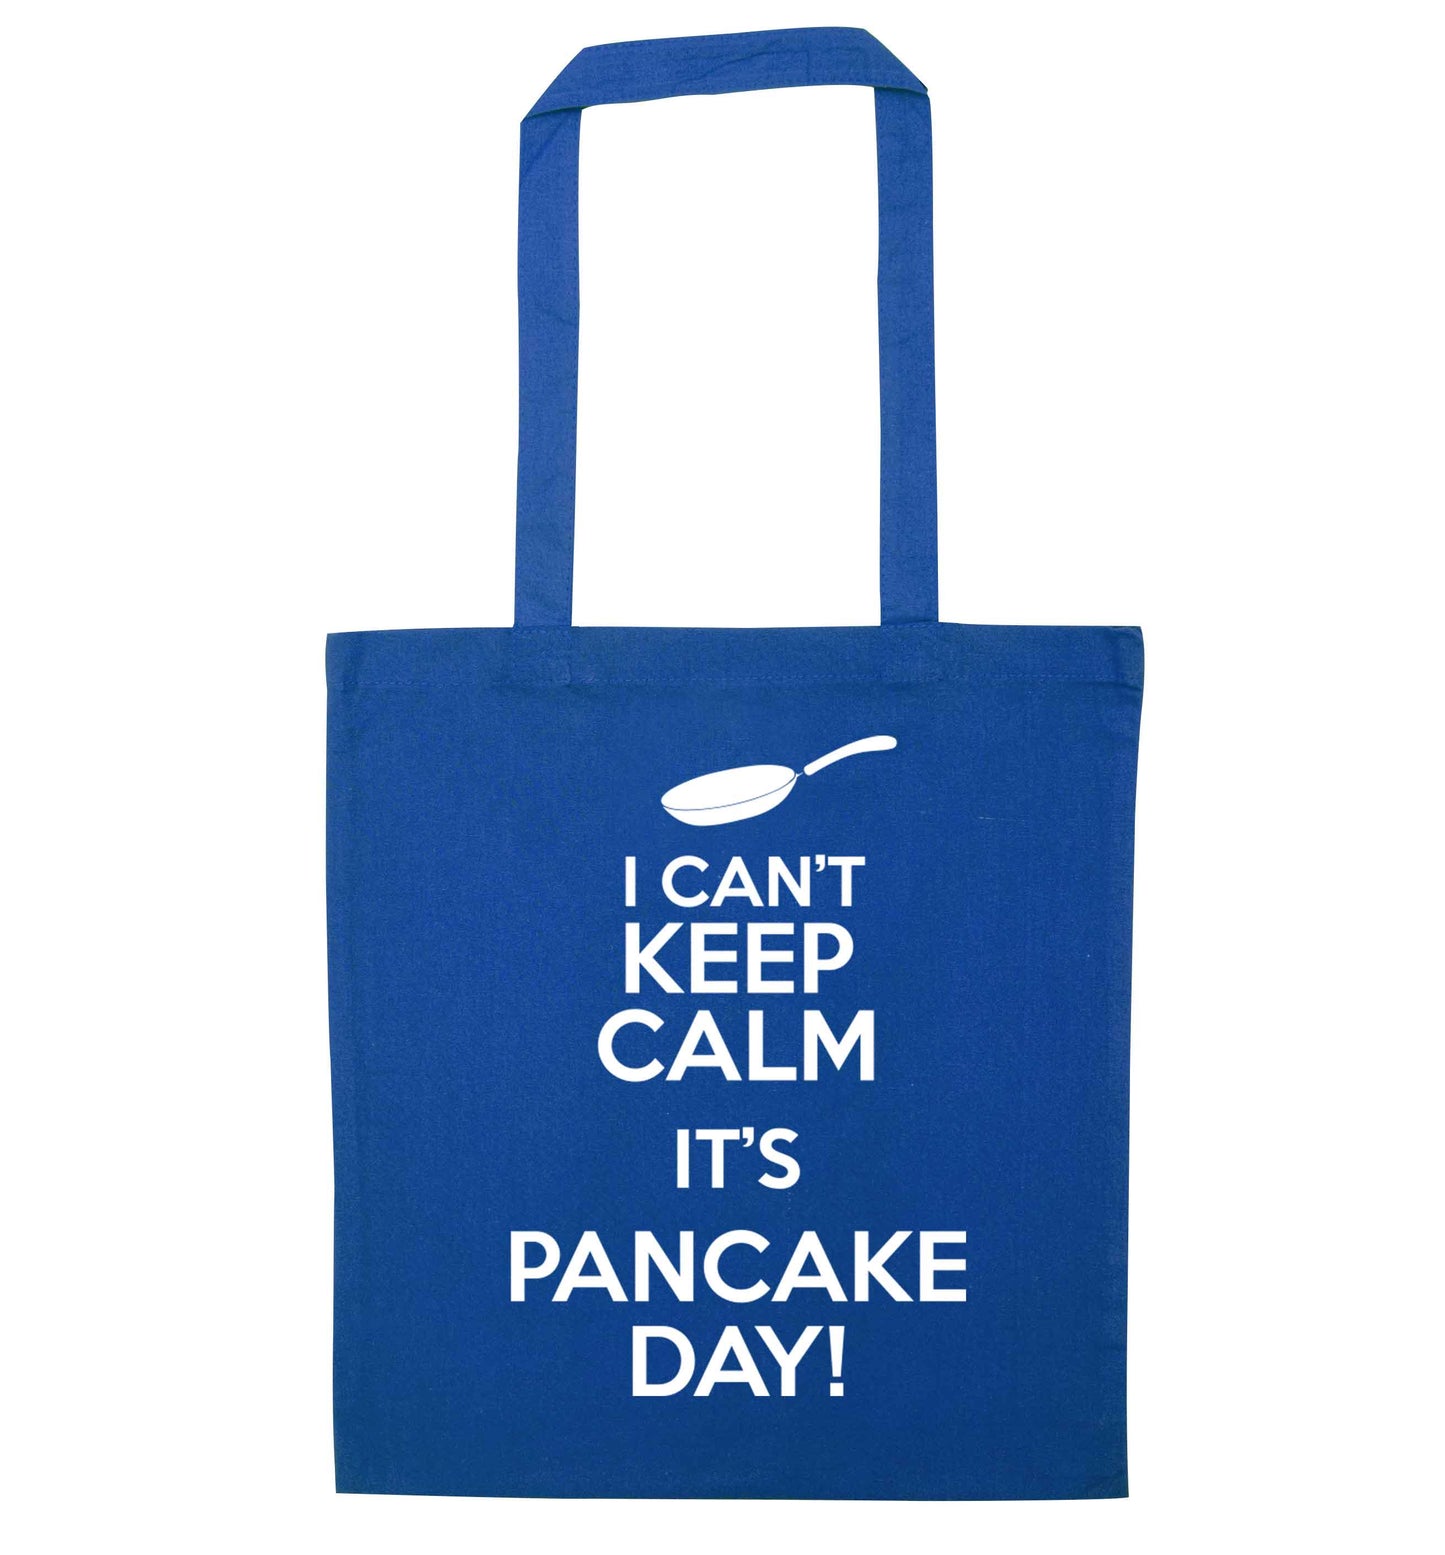 I can't keep calm it's pancake day! blue tote bag